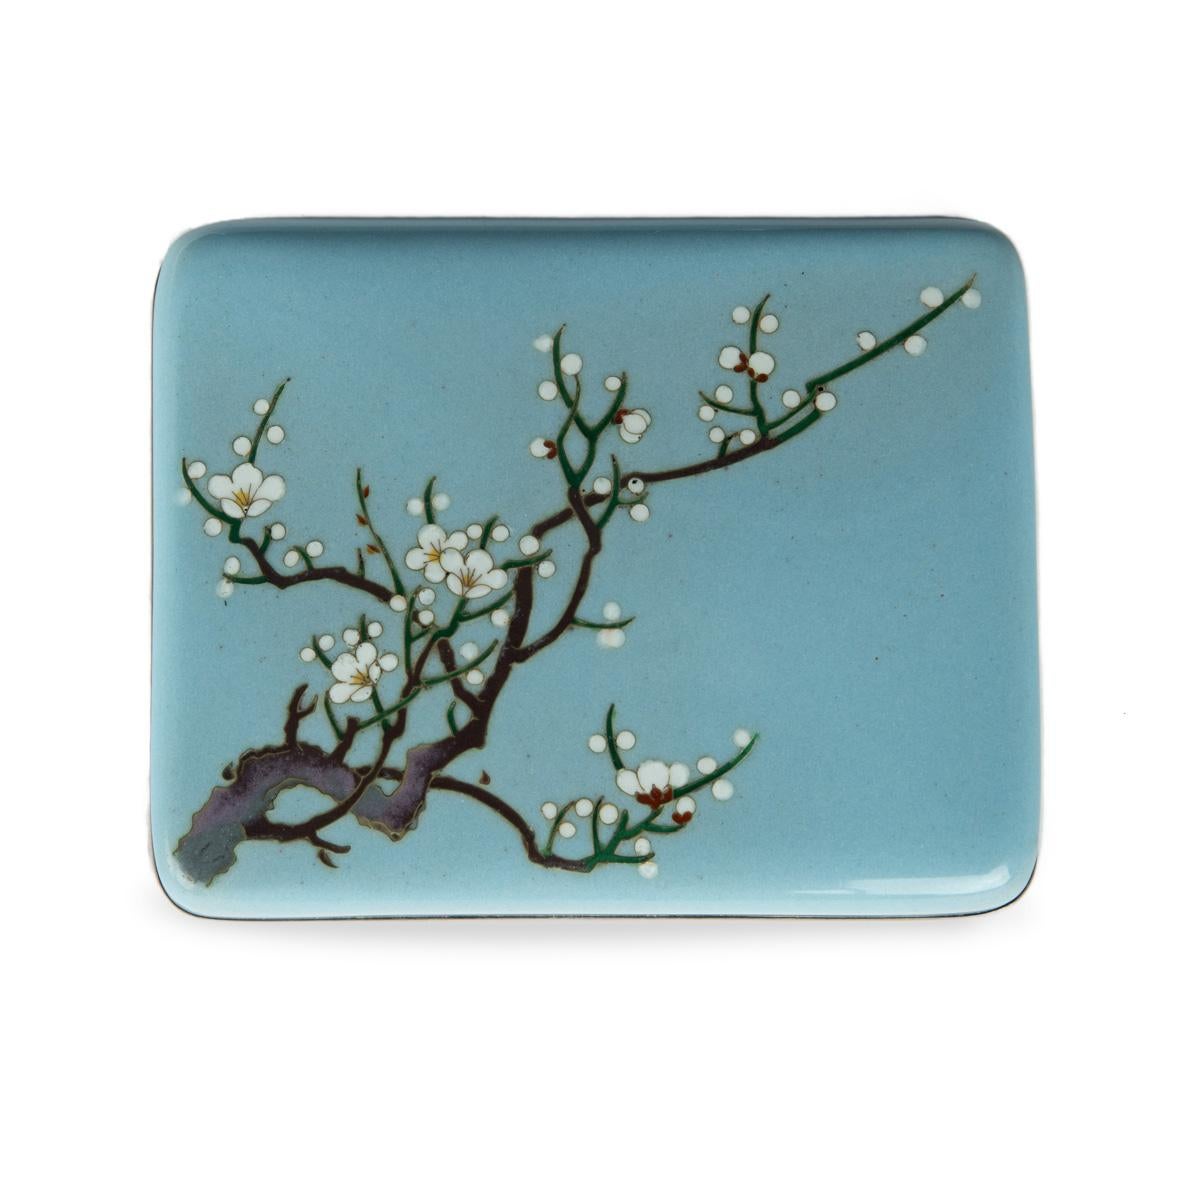 A small Showa period cloisonné box with a single branch of blossom, worked in wire and coloured enamels with a blossoming plum branch, reserved against a pale-blue ground, with silver rims and a silk lining.  Japanese, circa 1960.

